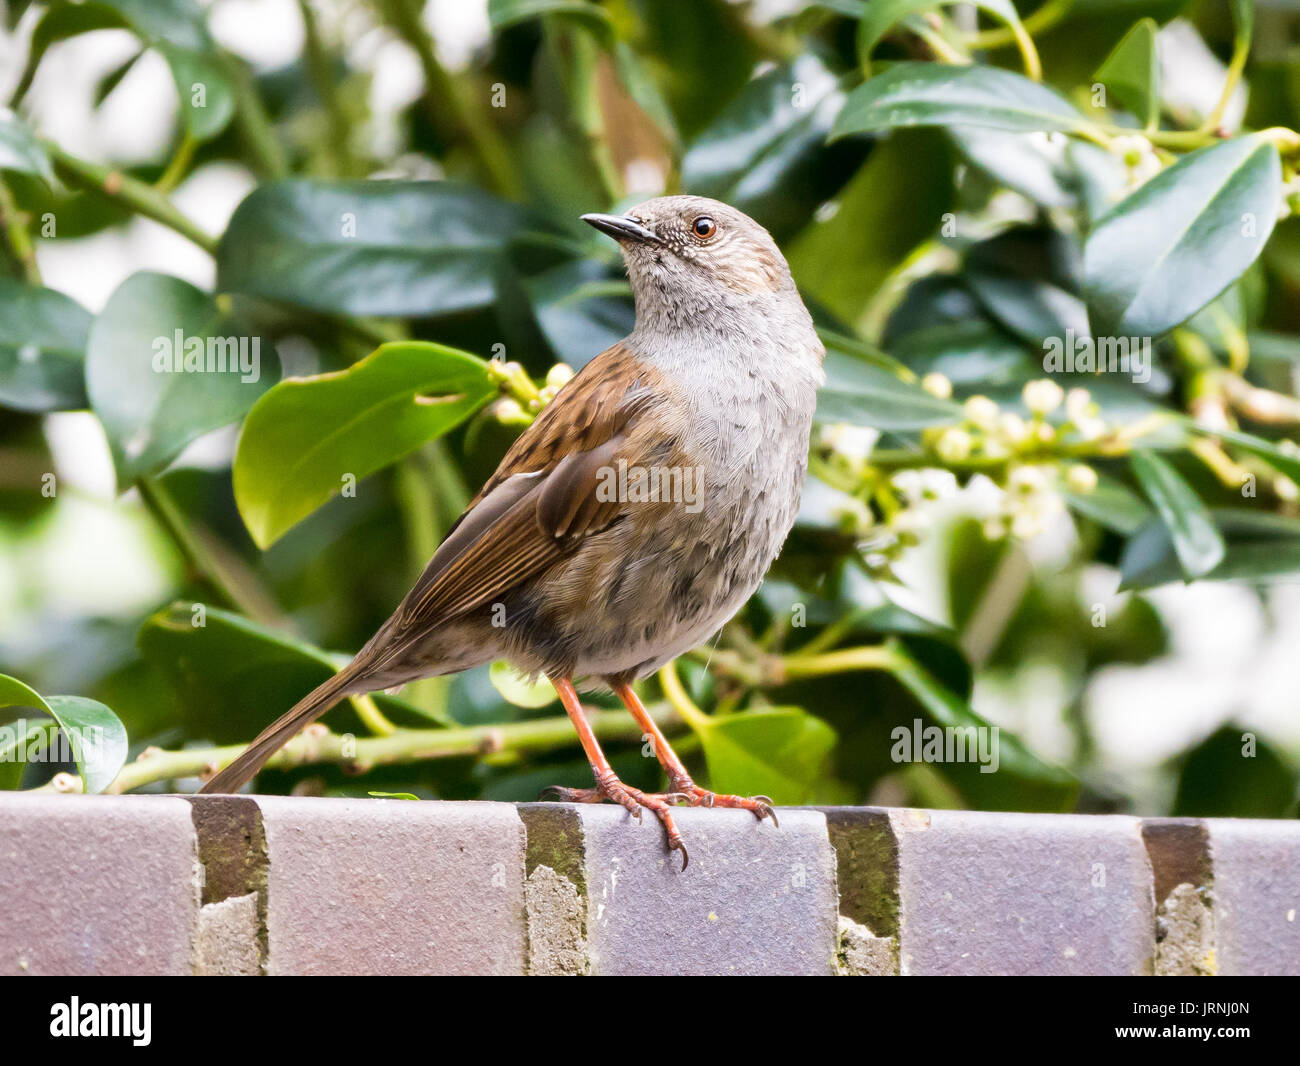 Portrait of adult dunnock or hedge accentor, Prunella modularis, perching on brick wall in garden Stock Photo